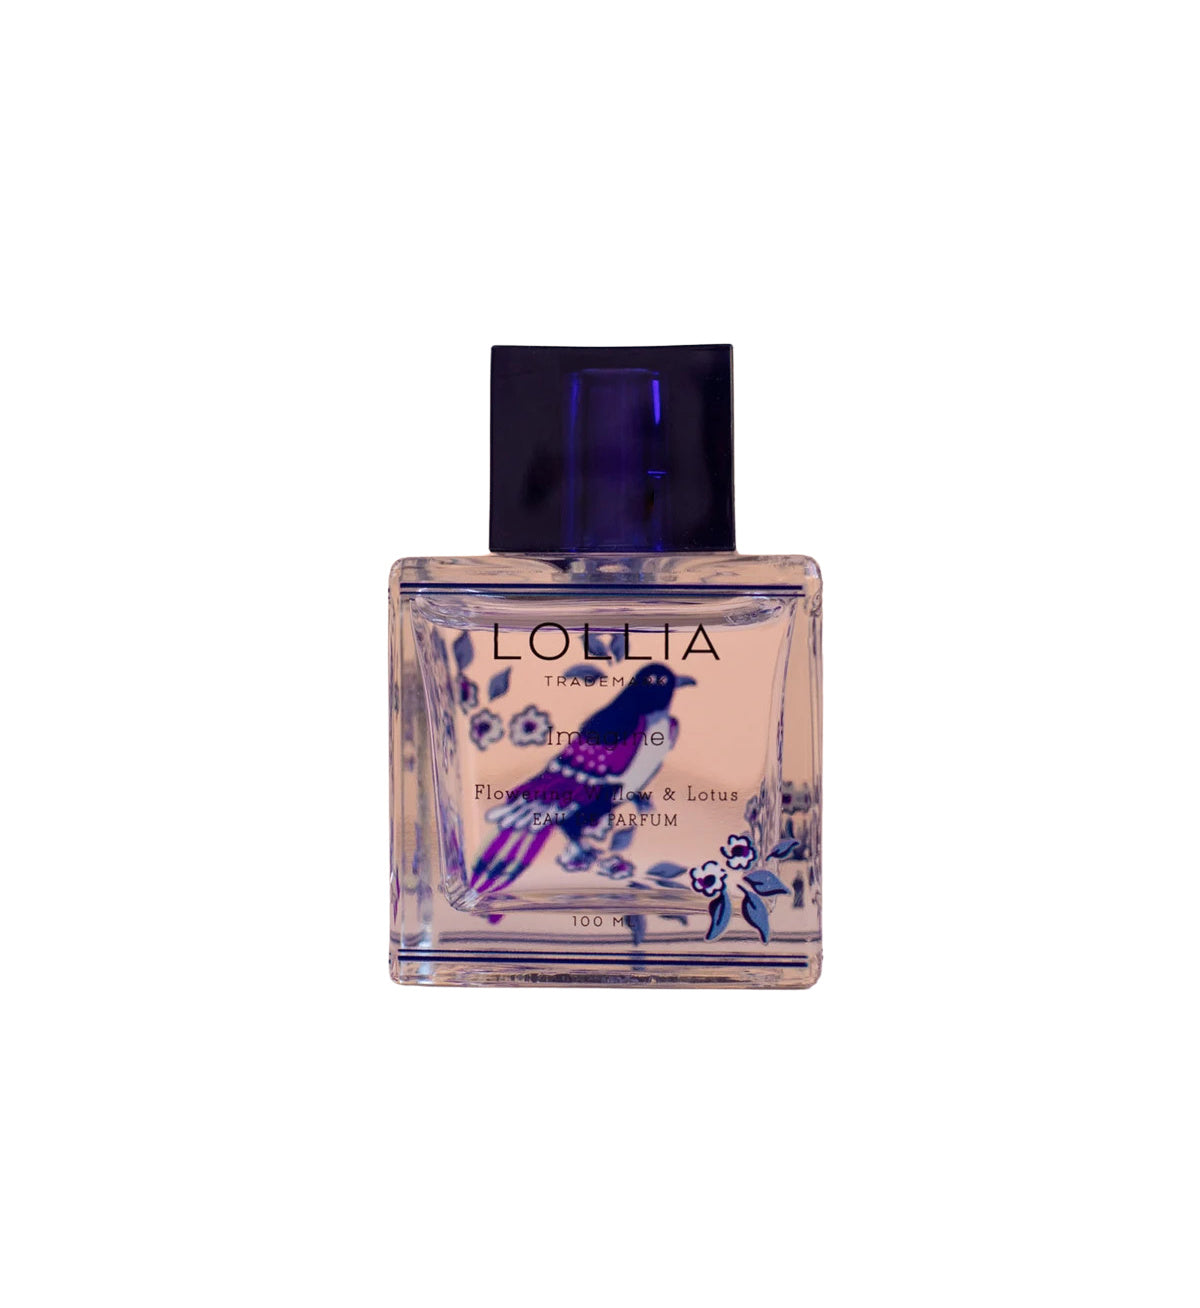 A square perfume bottle labeled "Lollia Imagine Eau de Parfum" by Margot Elena with a bird and rice flower design, containing a clear liquid, against a white background.